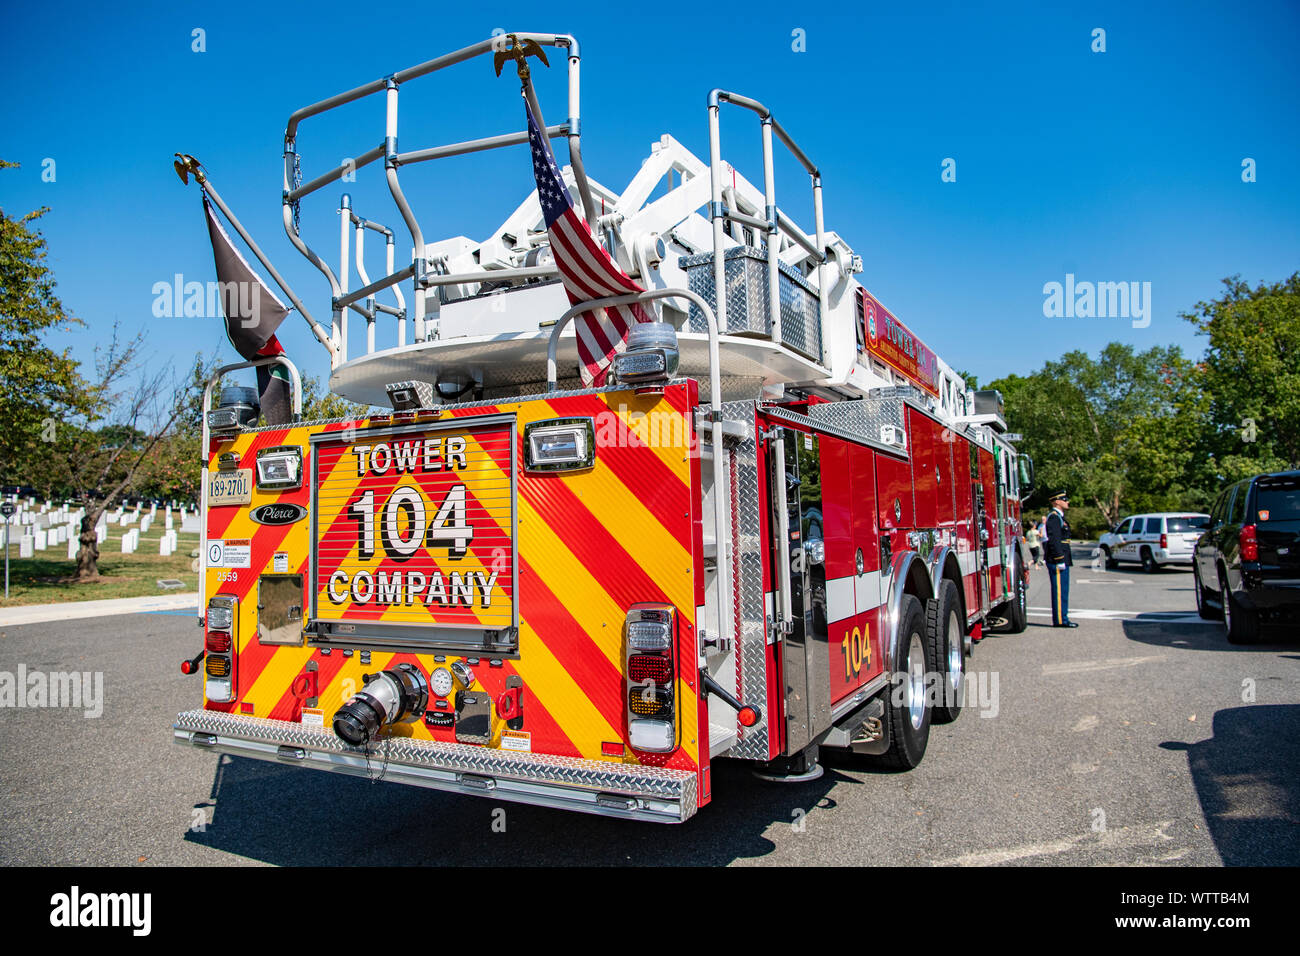 A fire truck from the Arlington County Fire Department parks outside of the Memorial Amphitheater at Arlington National Cemetery, Arlington, Virginia, Sept. 11, 2019. James Schwartz, former chief, Arlington County Fire Department; and David Povlitz, chief, Arlington County Fire Department; participated that day in an Army Honors Wreath-Laying Ceremony at the Tomb of the Unknown Soldier on the 18th anniversary of the 9/11 terrorist attacks. ACFD was the lead agency in response to the Pentagon attack on 9/11, led by Schwartz. (U.S. Army photo by Elizabeth Fraser / Arlington National Cemetery / r Stock Photo